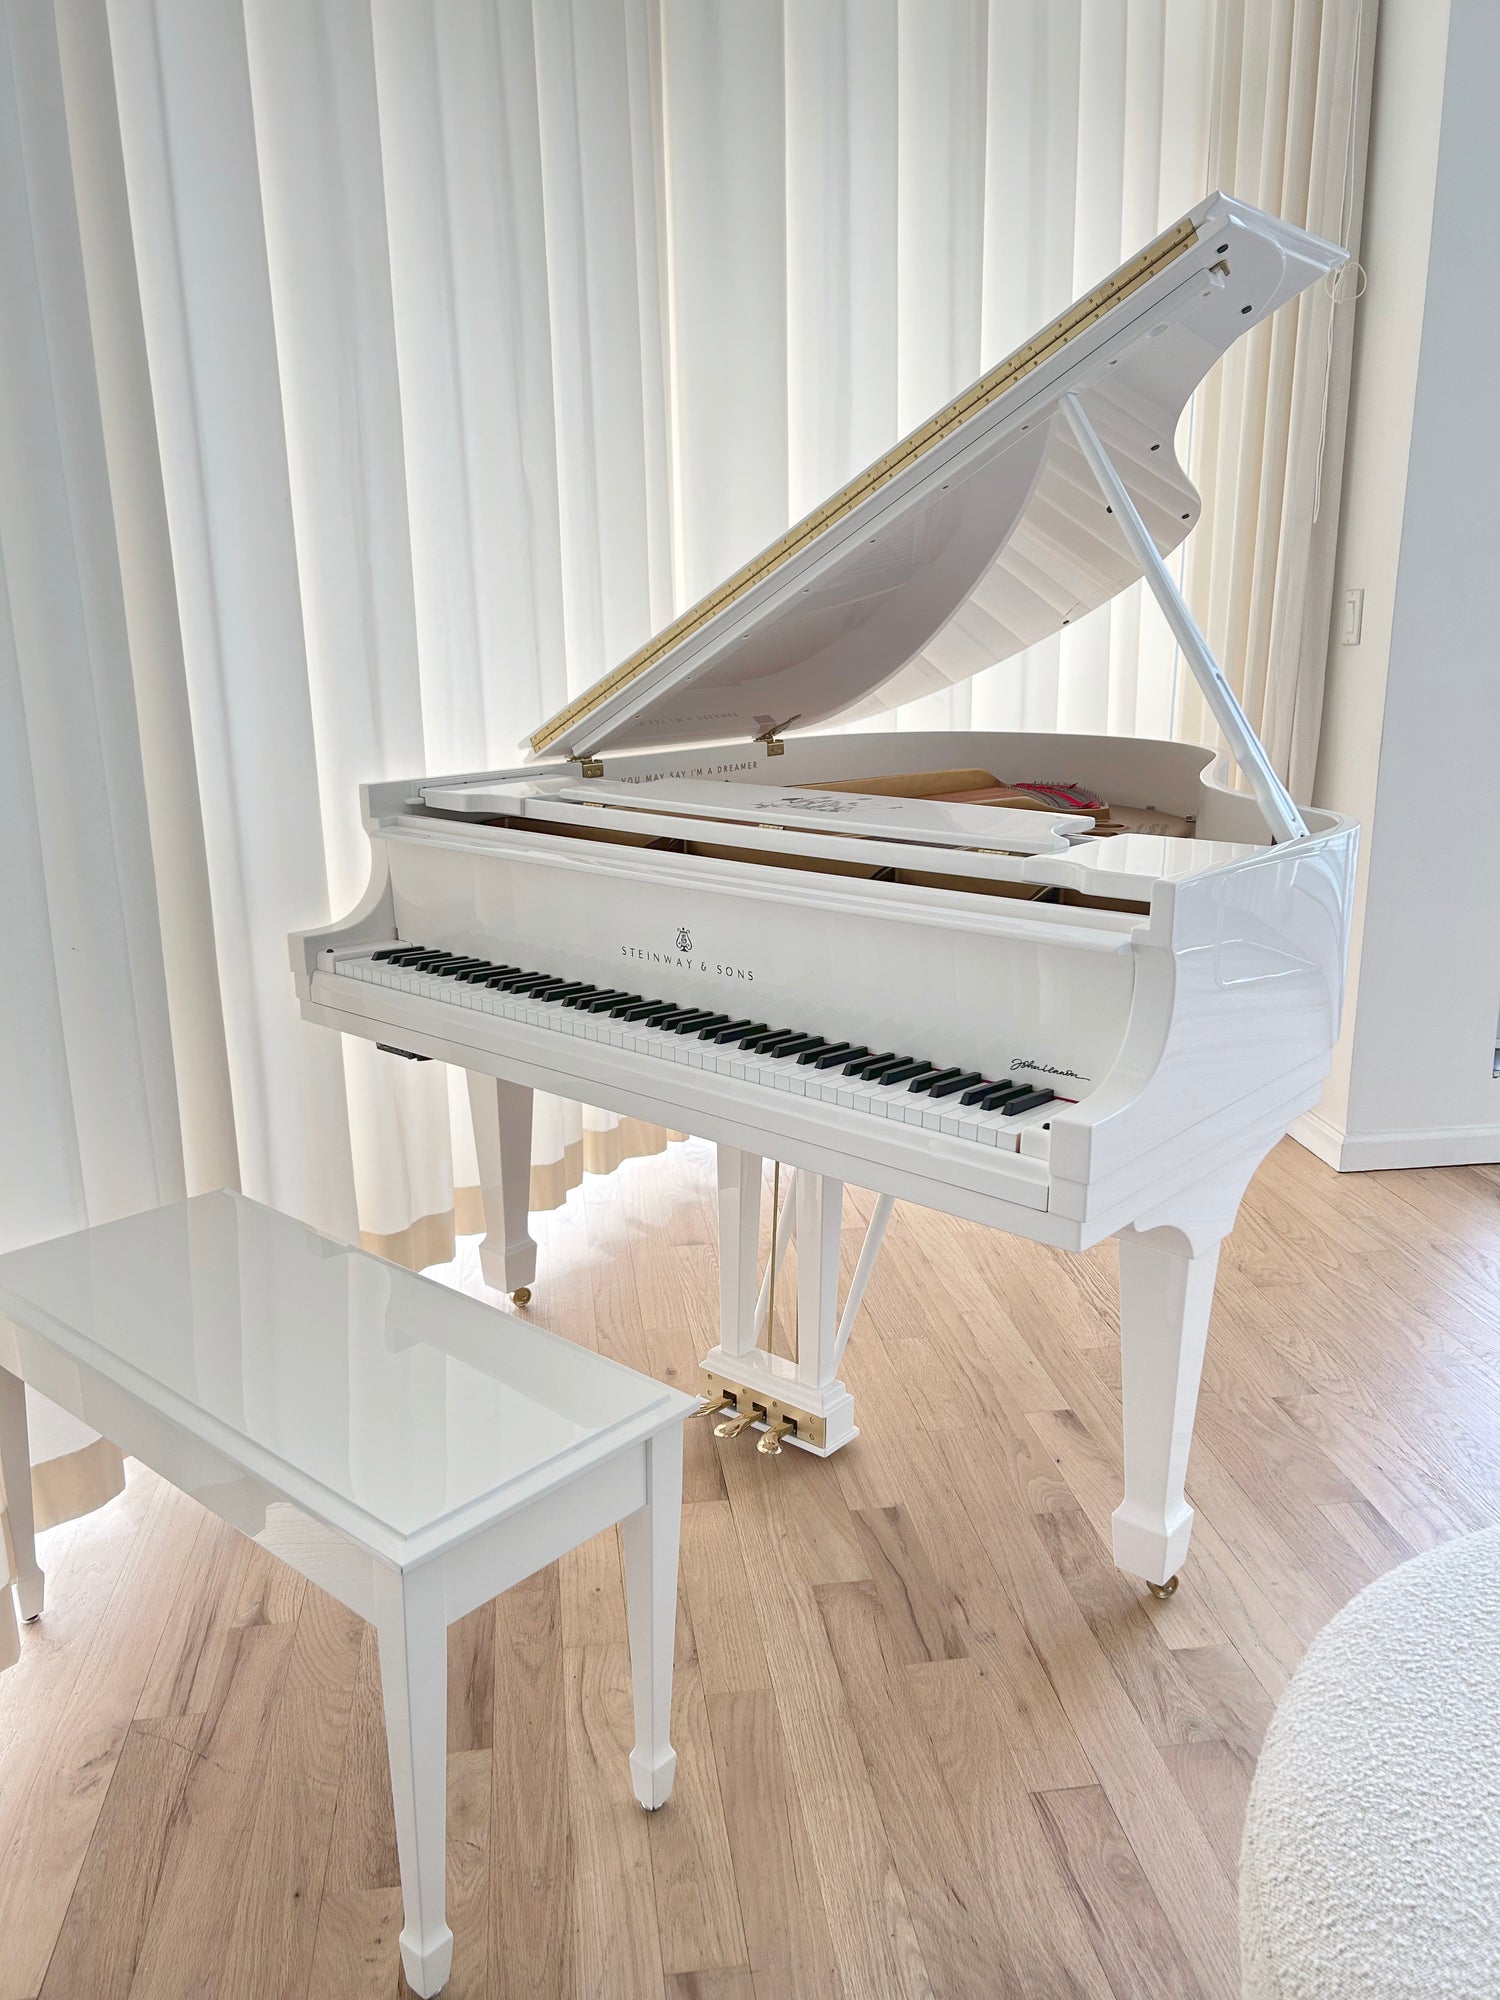 All Pre-Owned | Used Steinway Pianos